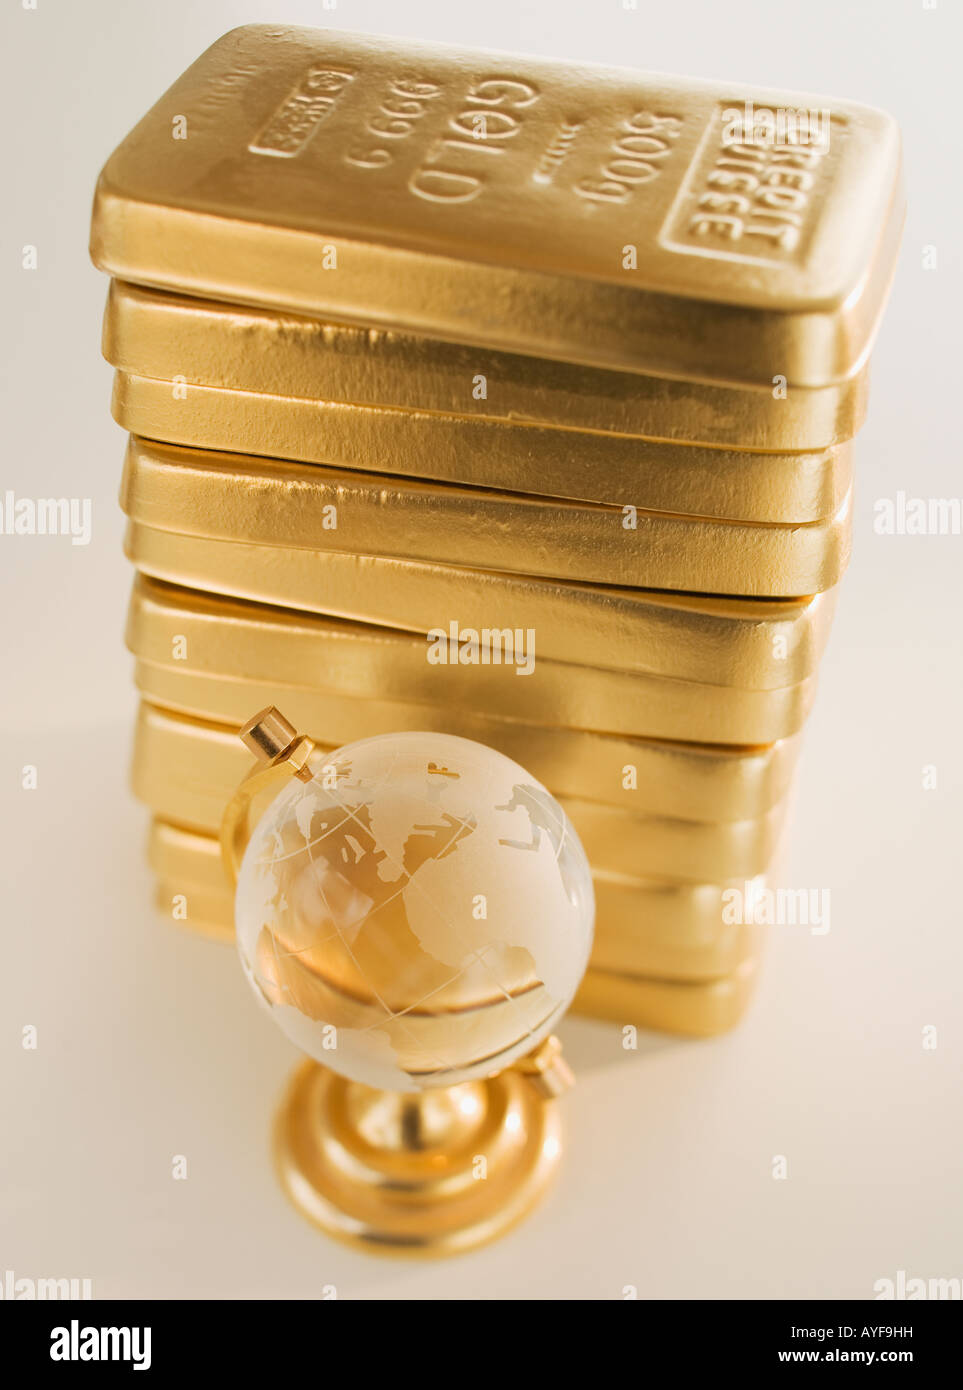 Globe next to stack of gold bars Stock Photo